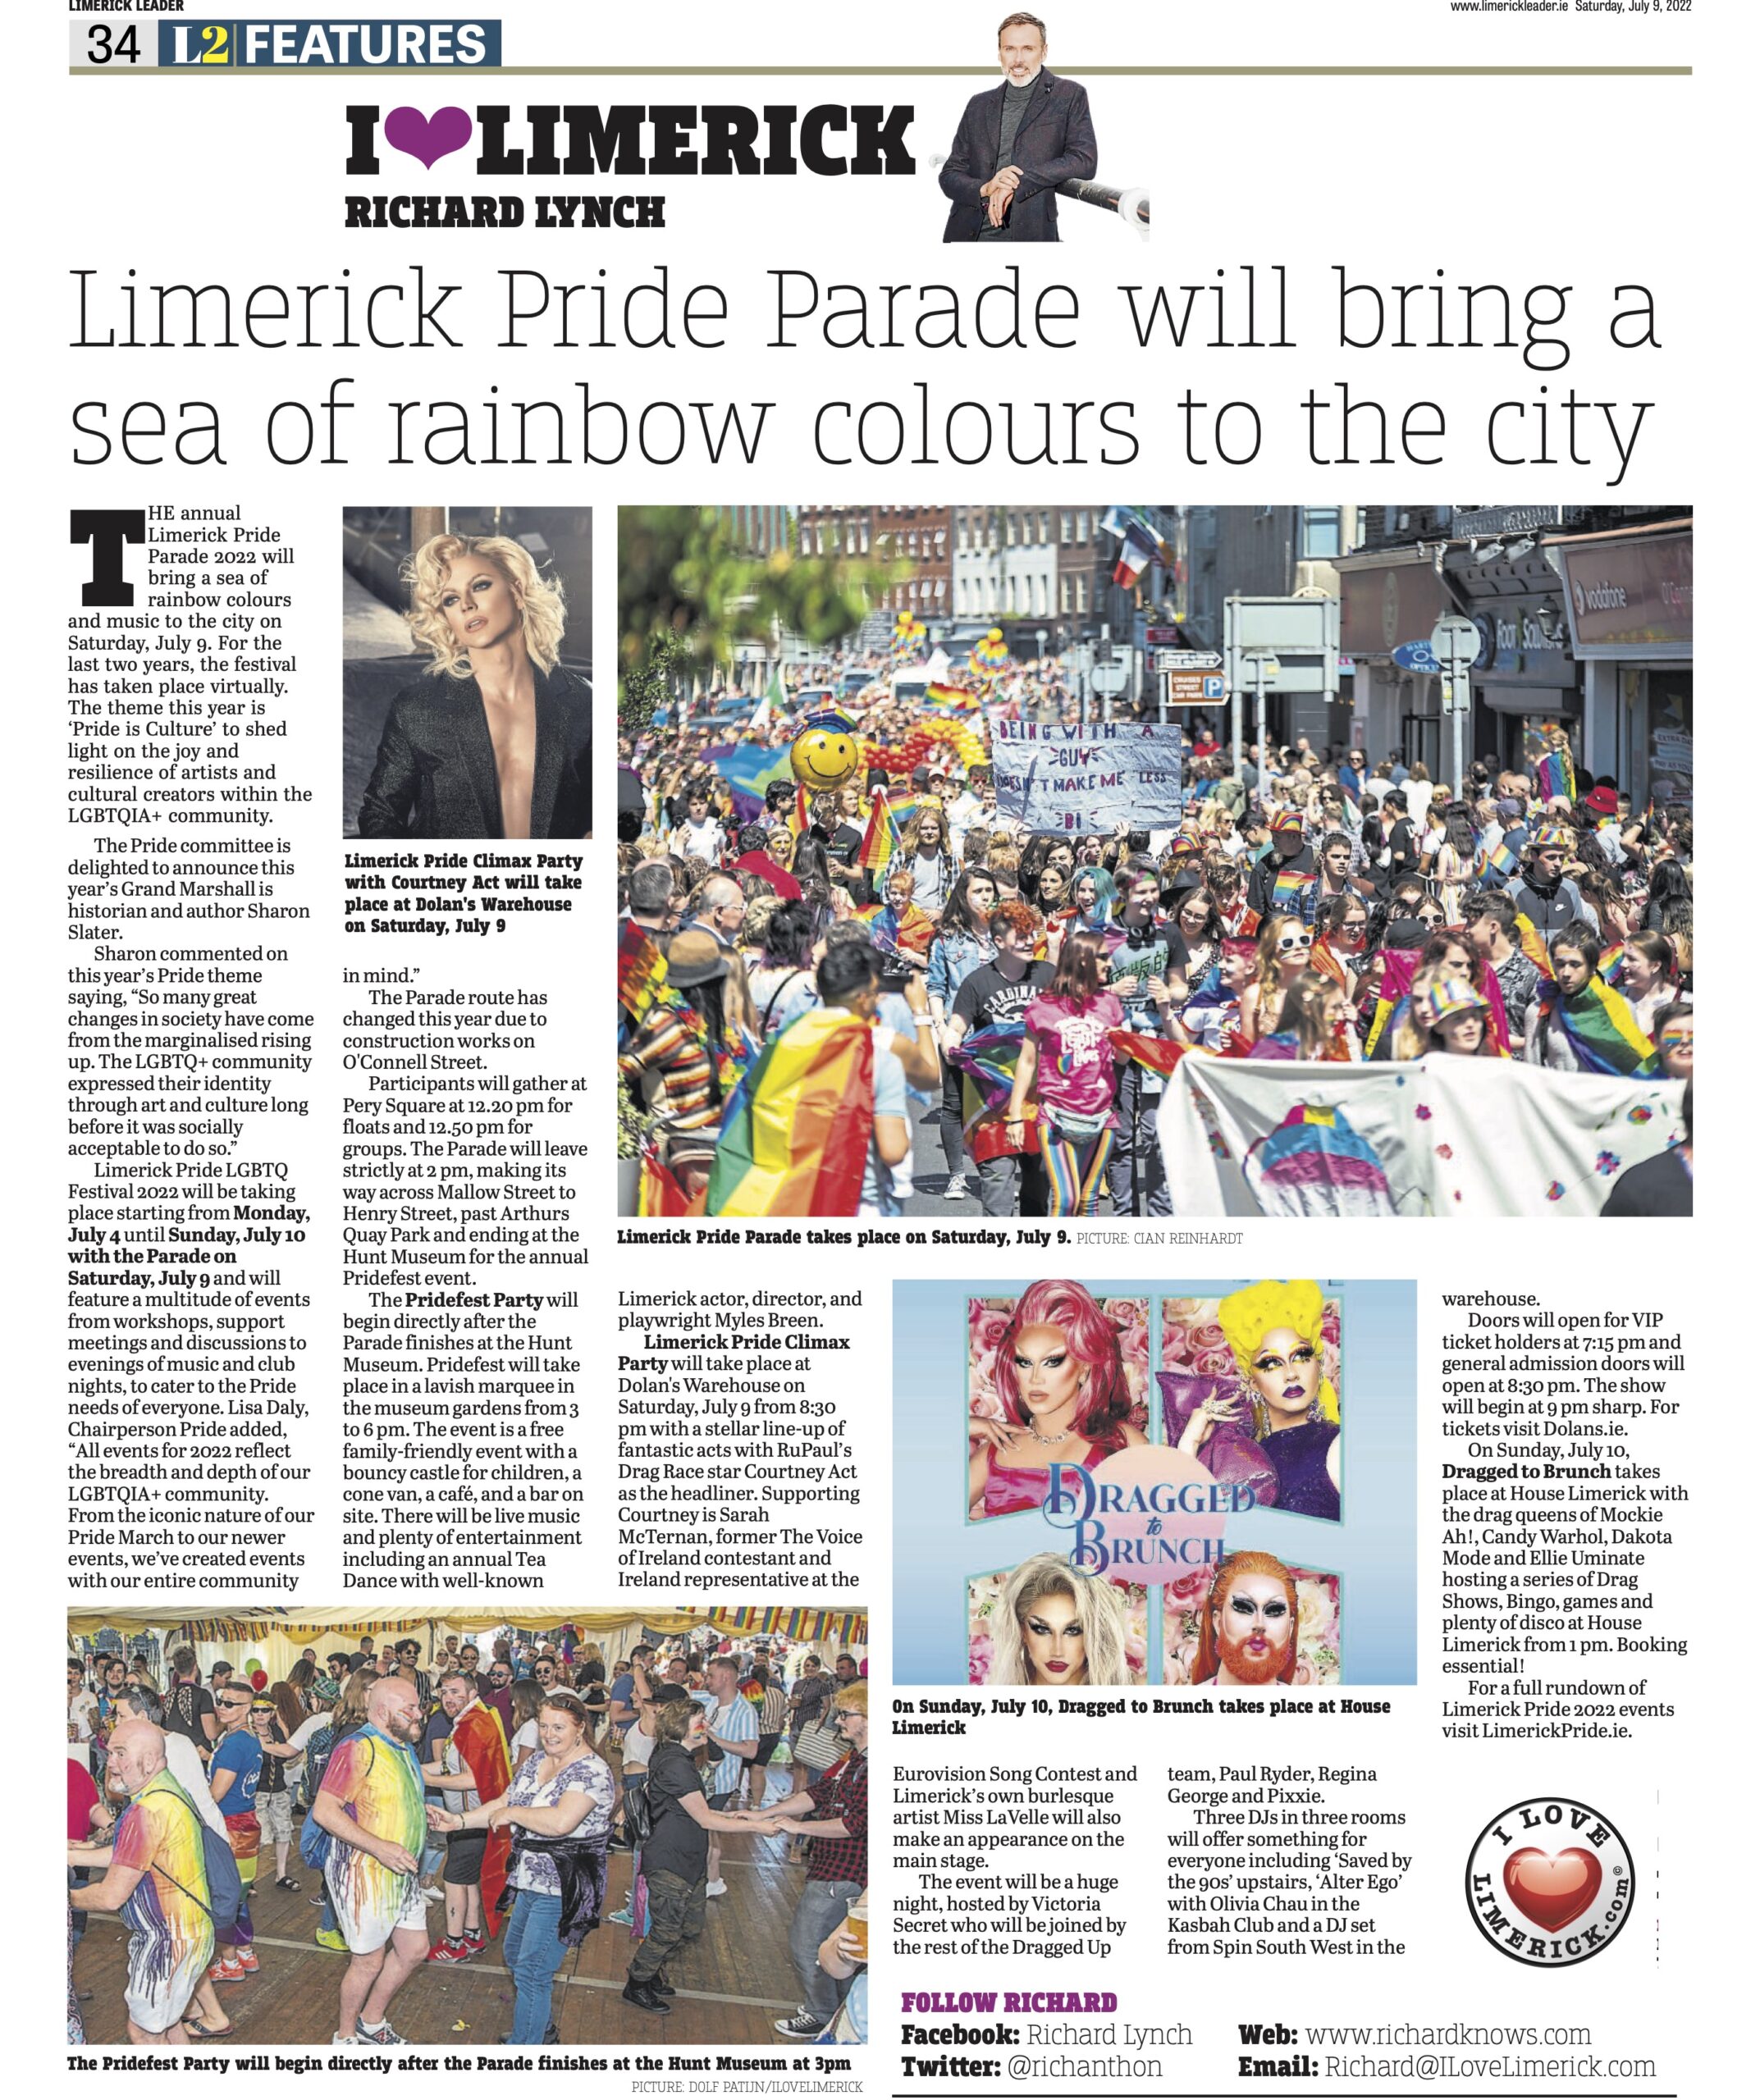 The Leader Column July 9 2022 - Limerick Pride Parade will bring a sea of rainbow colours to the city.